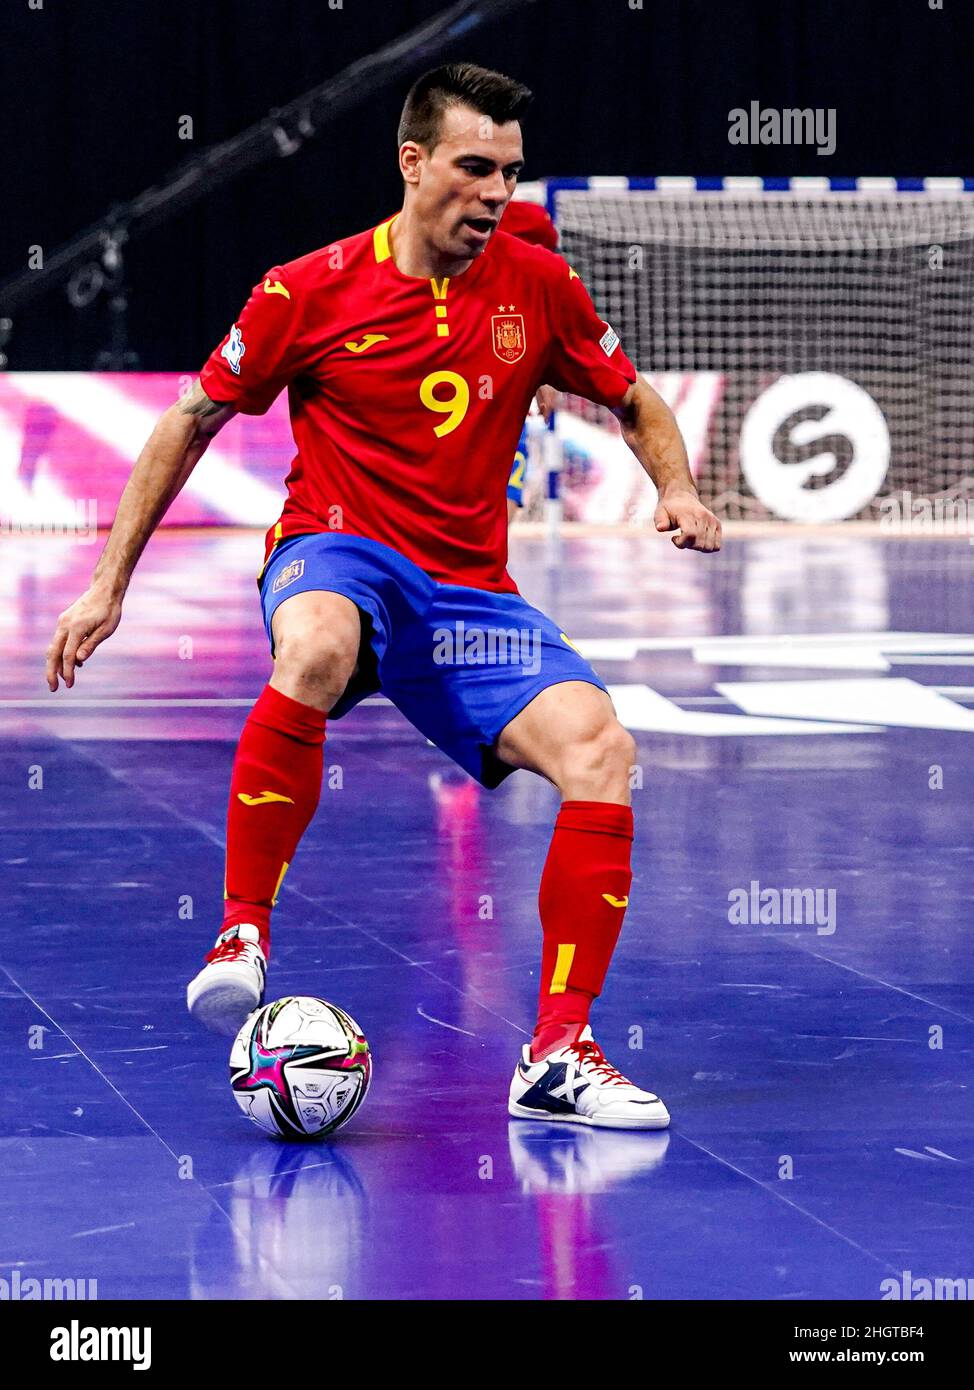 GRONINGEN, NETHERLANDS - JANUARY 22: Sergio Lozano of Spain during the Men's Futsal Euro 2022 Group D match between Spain and the Bosnia and Herzegovina at the Martiniplaza on January 22, 2022 in Groningen, Netherlands (Photo by Andre Weening/Orange Pictures) Stock Photo